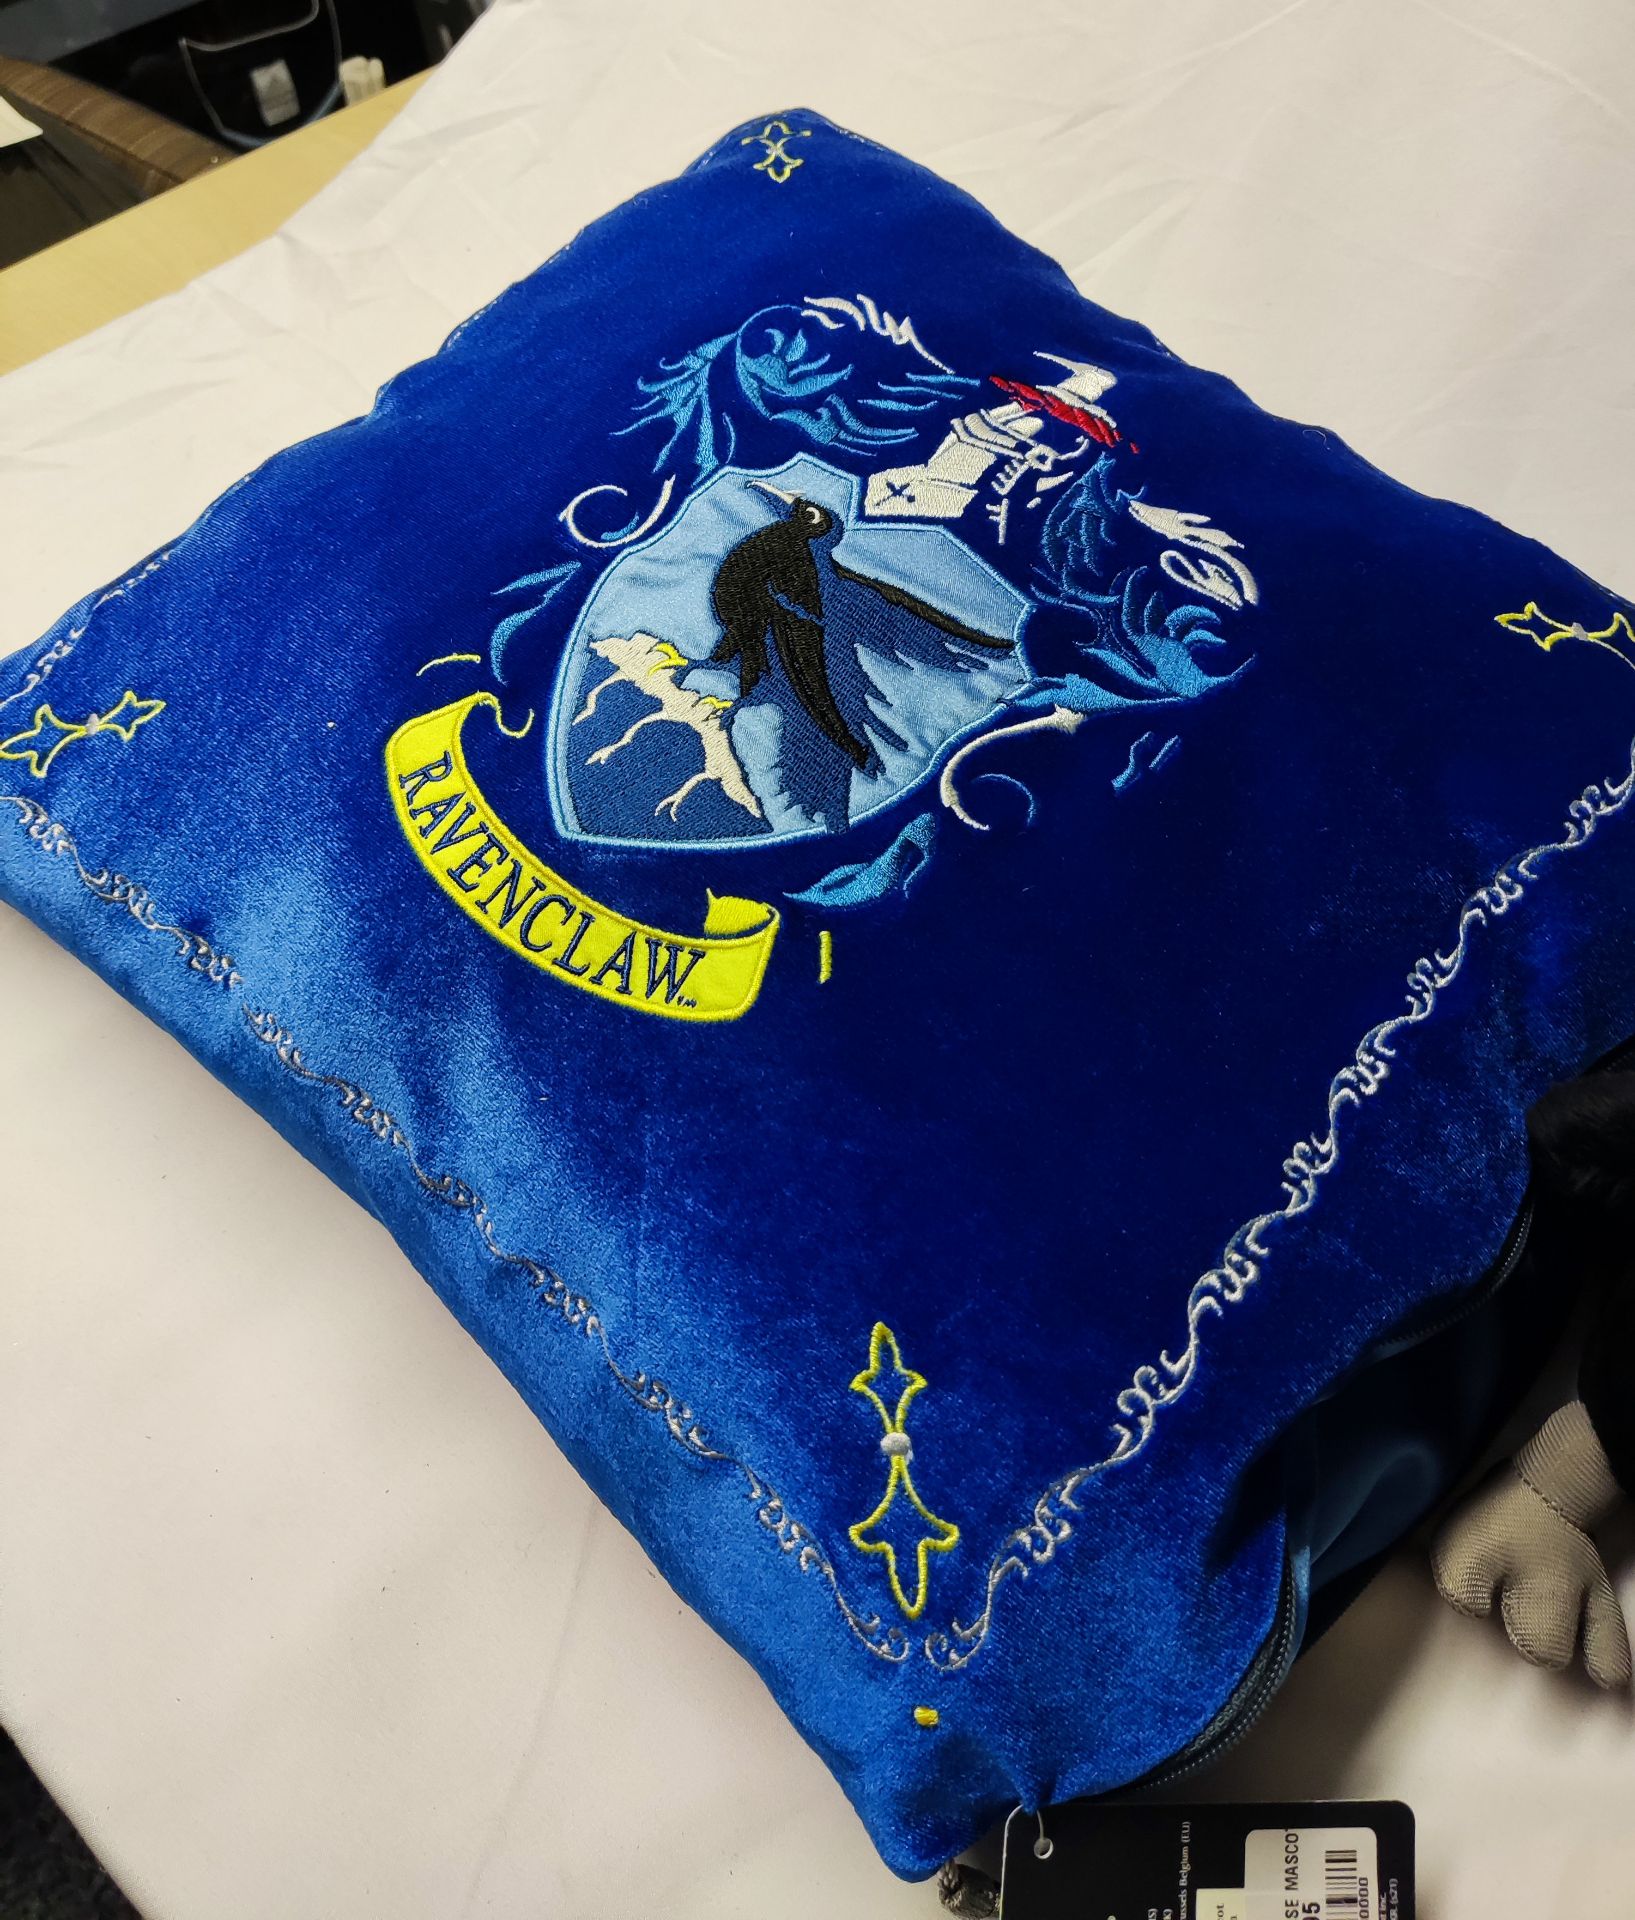 1 x NOBLE COLLECTION Harry Potter Ravenclaw House Mascot Cushion - New/Unused - RRP £39.95 - Ref: / - Image 10 of 11